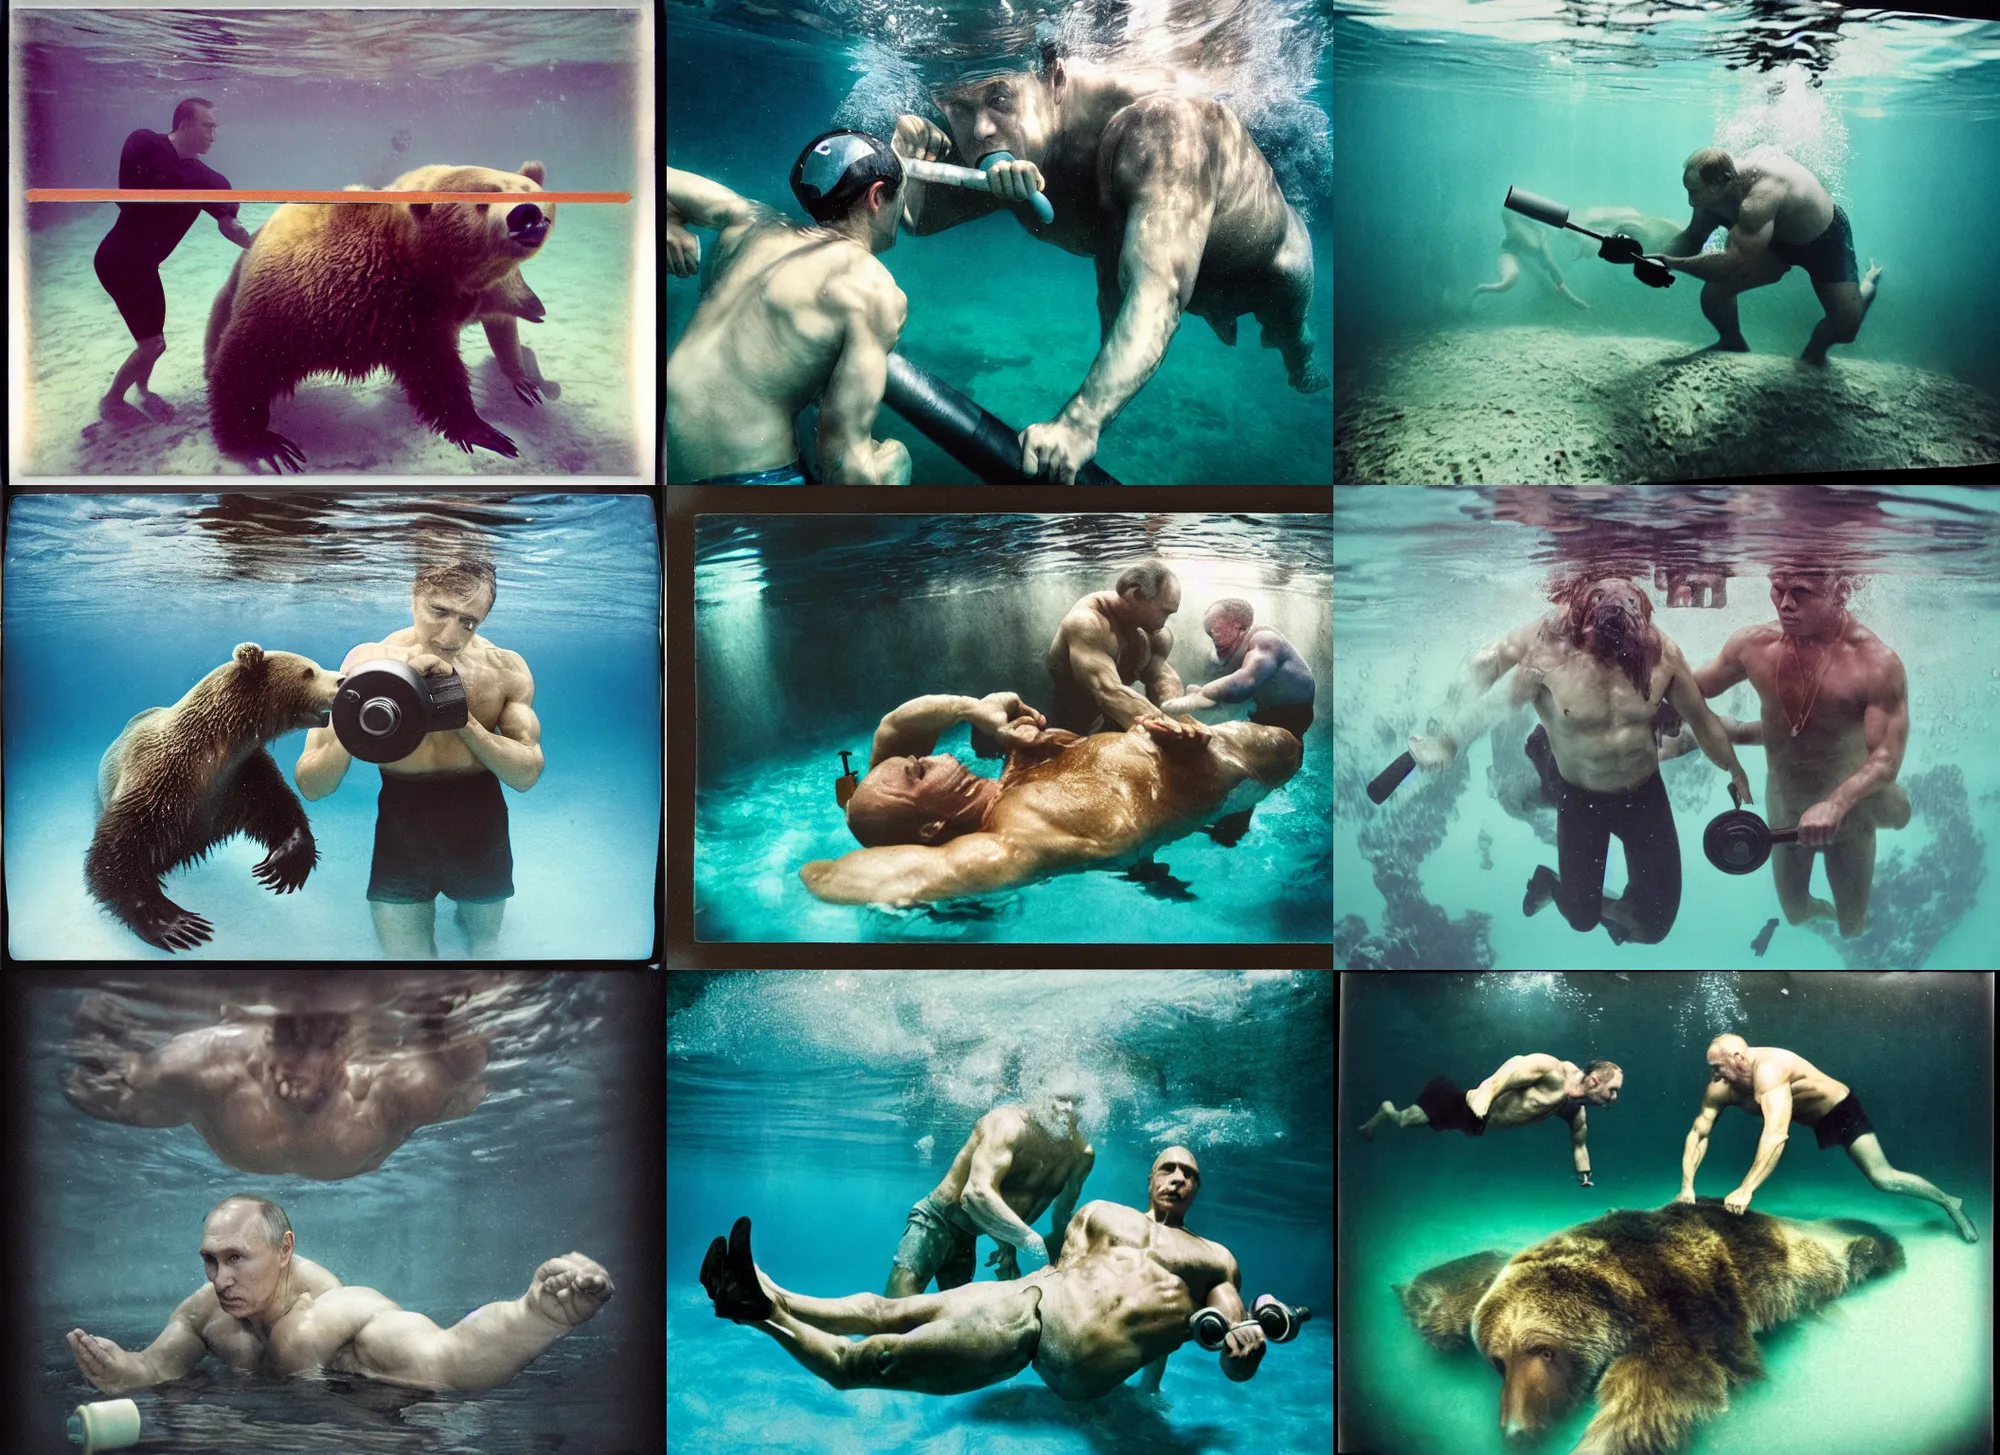 Prompt: medium shot, vladimir putin pumping iron l, underwater with grizzly bear, polaroid photo, vintage, neutral colors, underwater, by shawn heinrichs and gregory crewdson